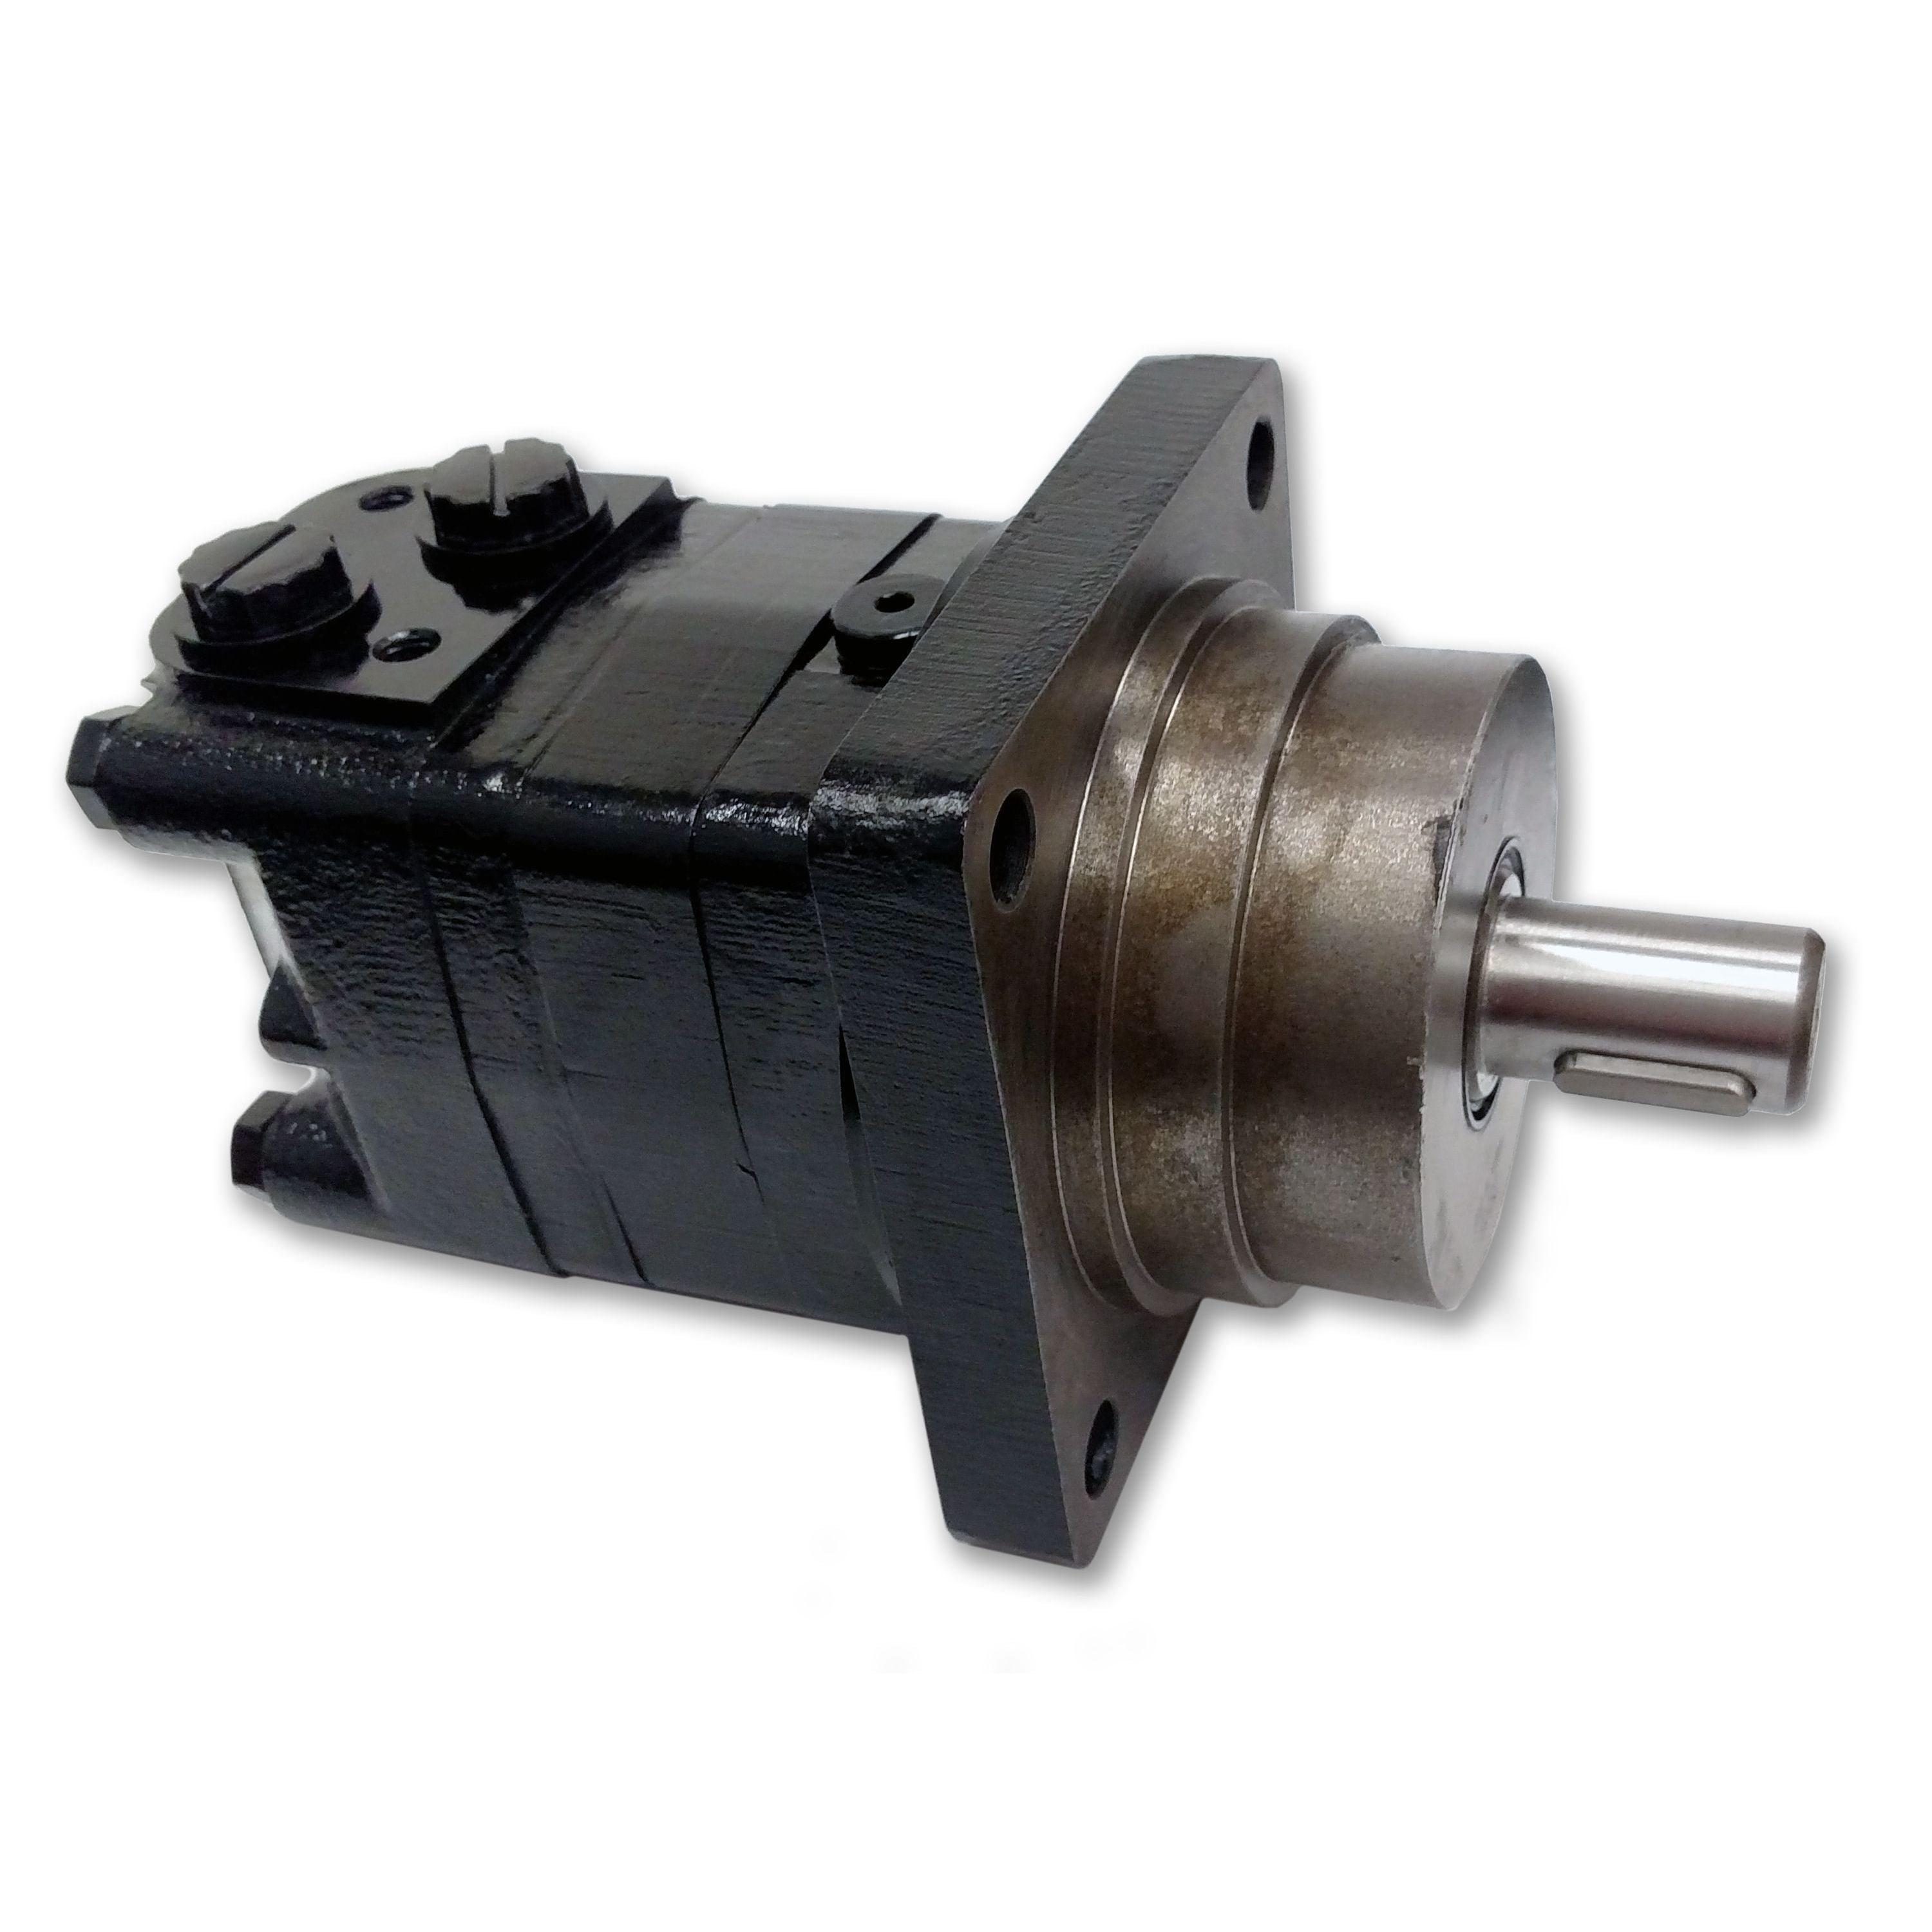 BMSY-400-WE-G-S : Dynamic LSHT Motor, 394cc, 185RPM, 7786in-lb, 2320psi Differential, 19.81GPM, Wheel Mount, 1.25" Bore x 5/16" Key Shaft, Side Ported, #10 SAE (5/8")